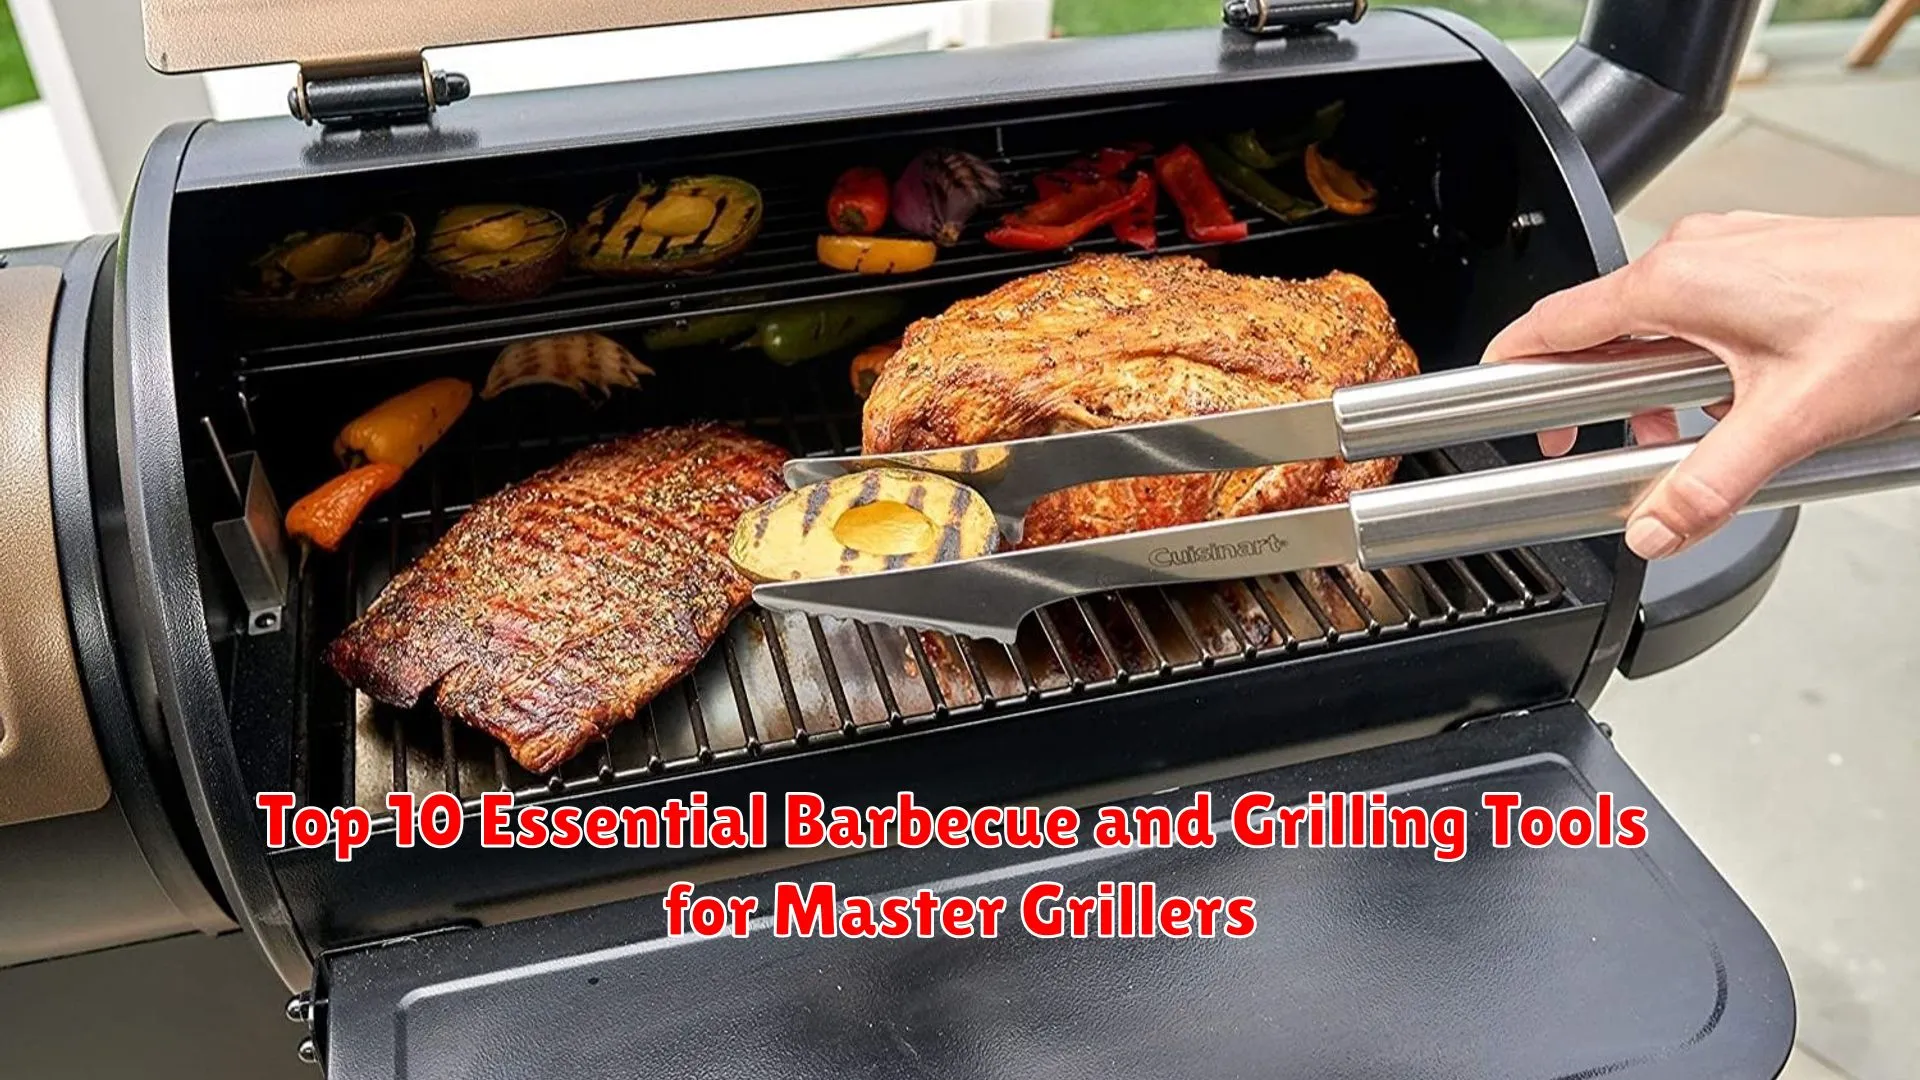 Top 10 Essential Barbecue and Grilling Tools for Master Grillers